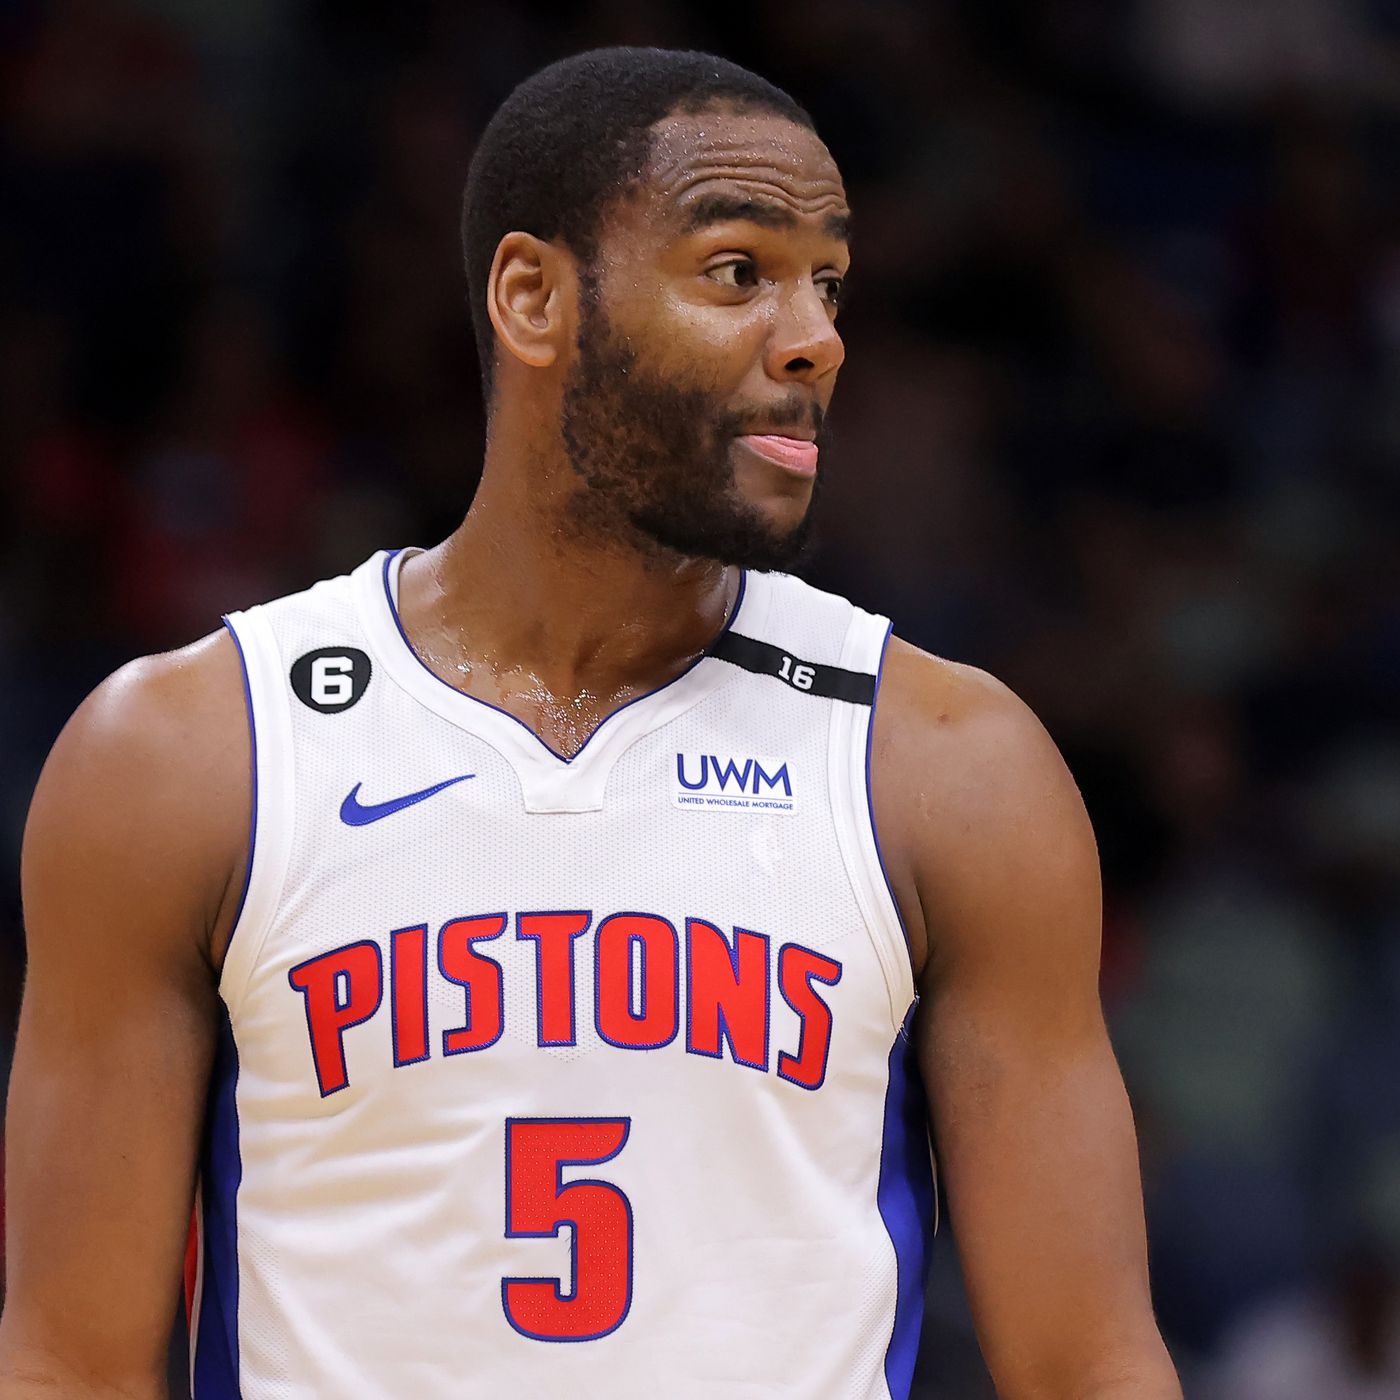 Alec Burks, Detroit Pistons Rumors: Alec Burks Speculated to be the New York Knicks Latest Signing